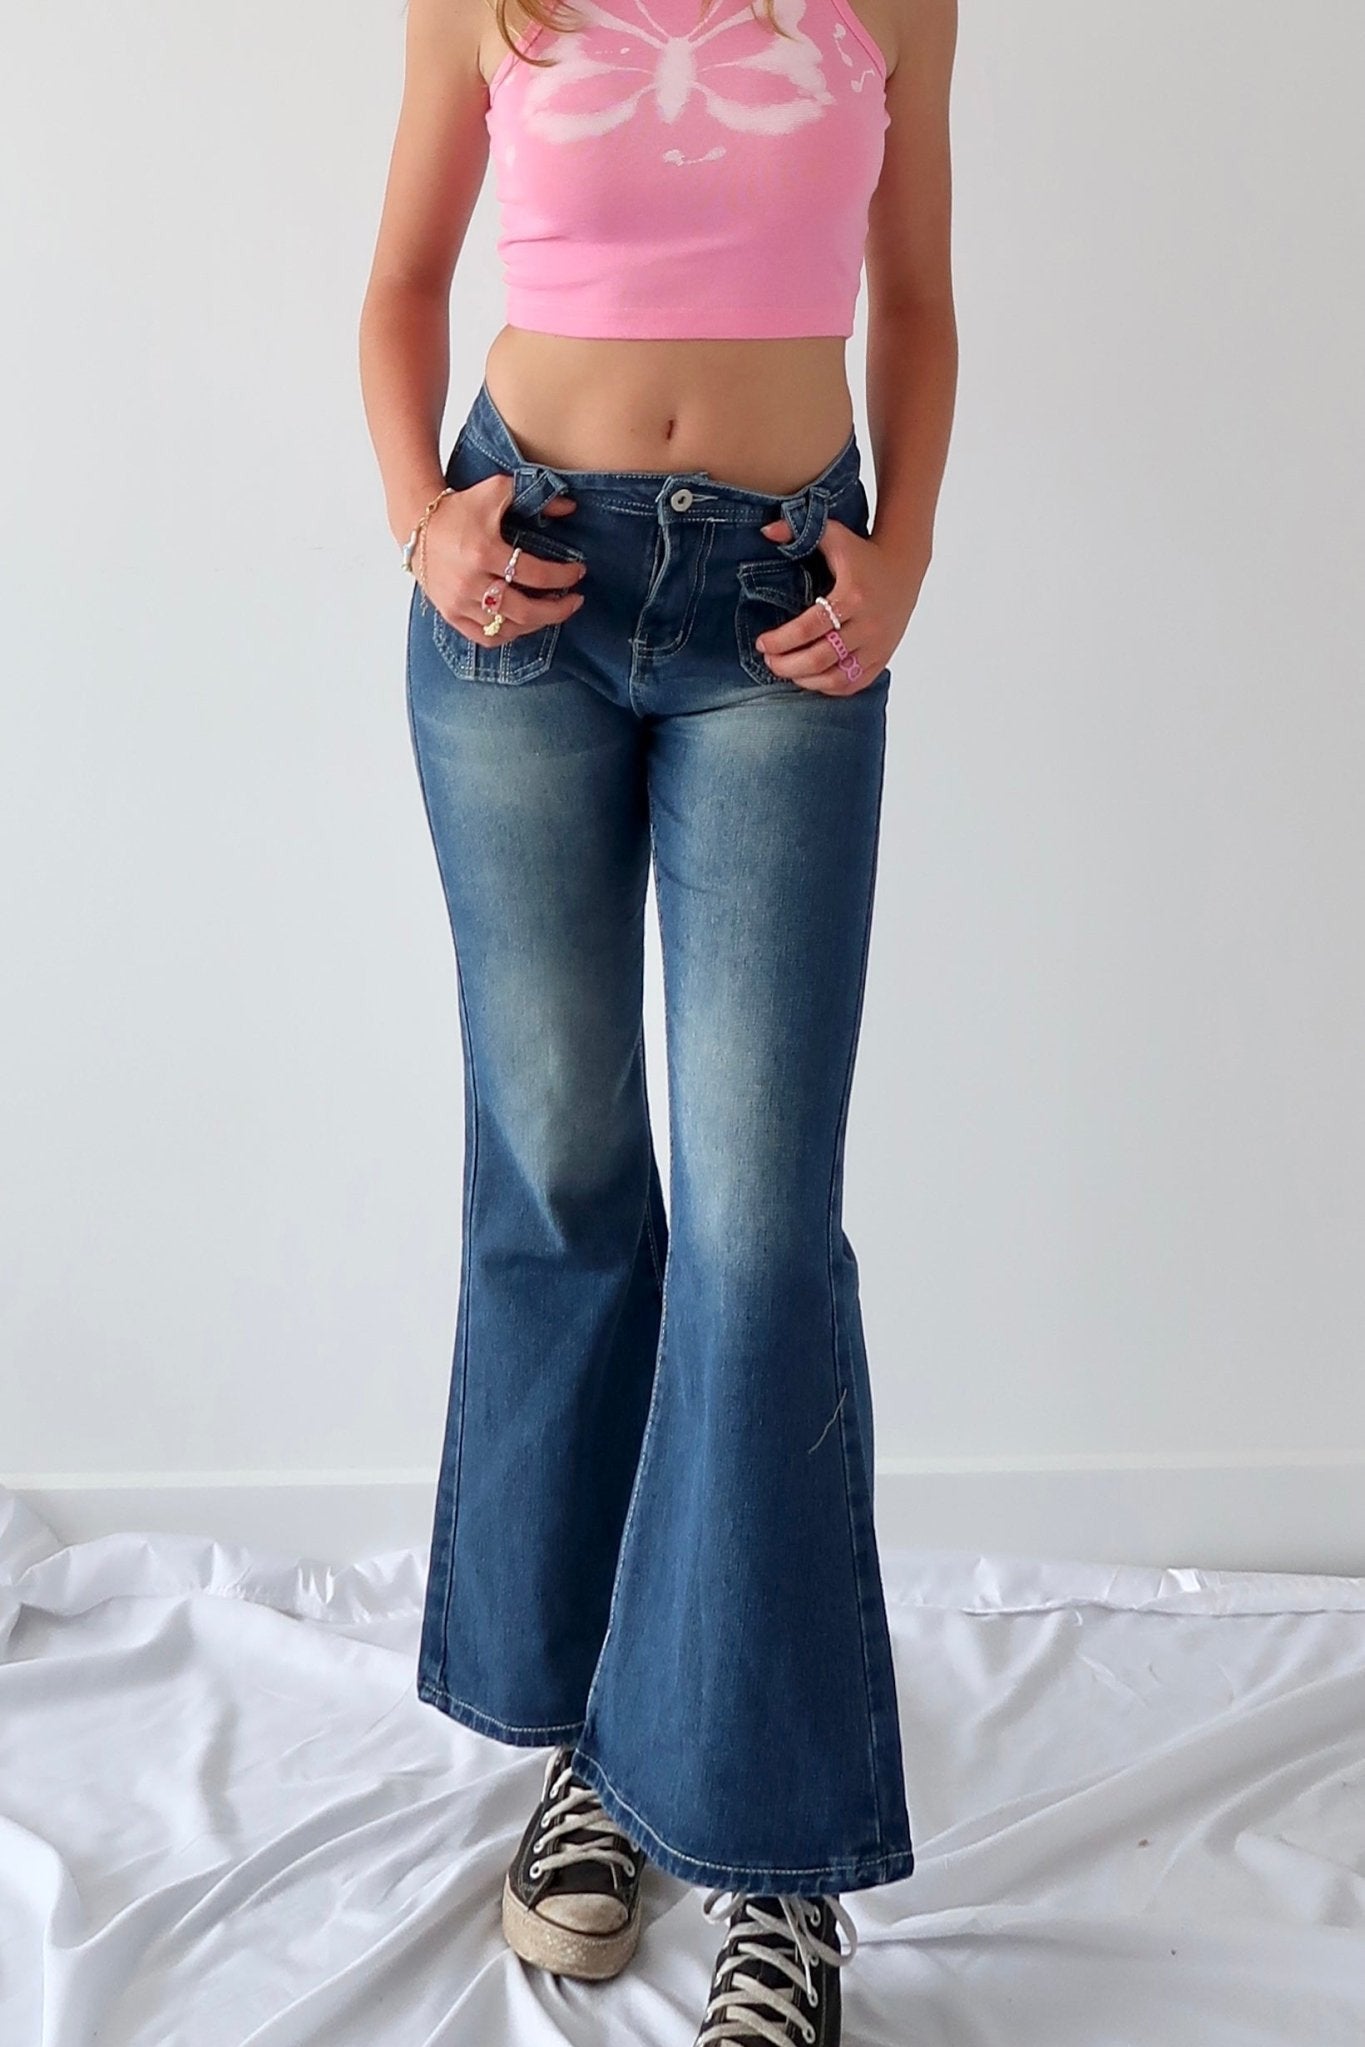 Sugar baby low-rise wide leg jeans - SCG_COLLECTIONSBottom